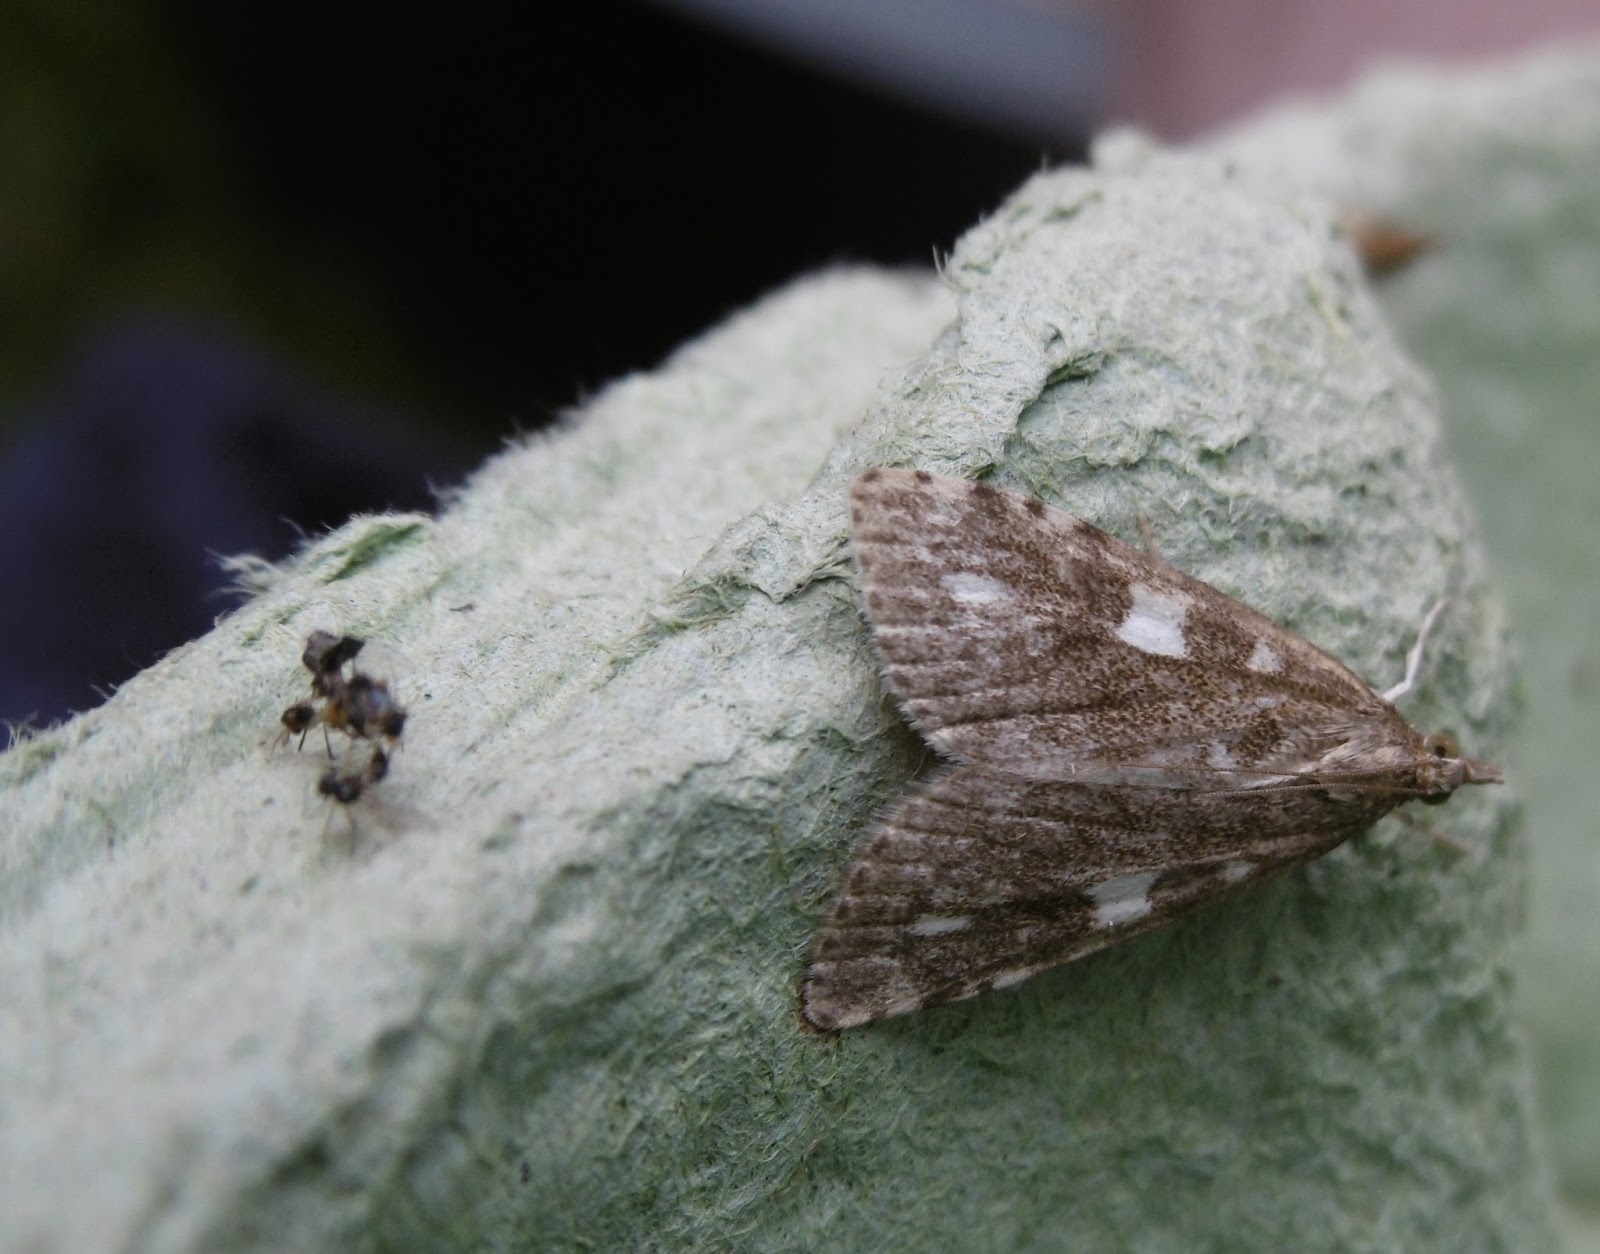 Martin's Moths: Small but perfectly formed